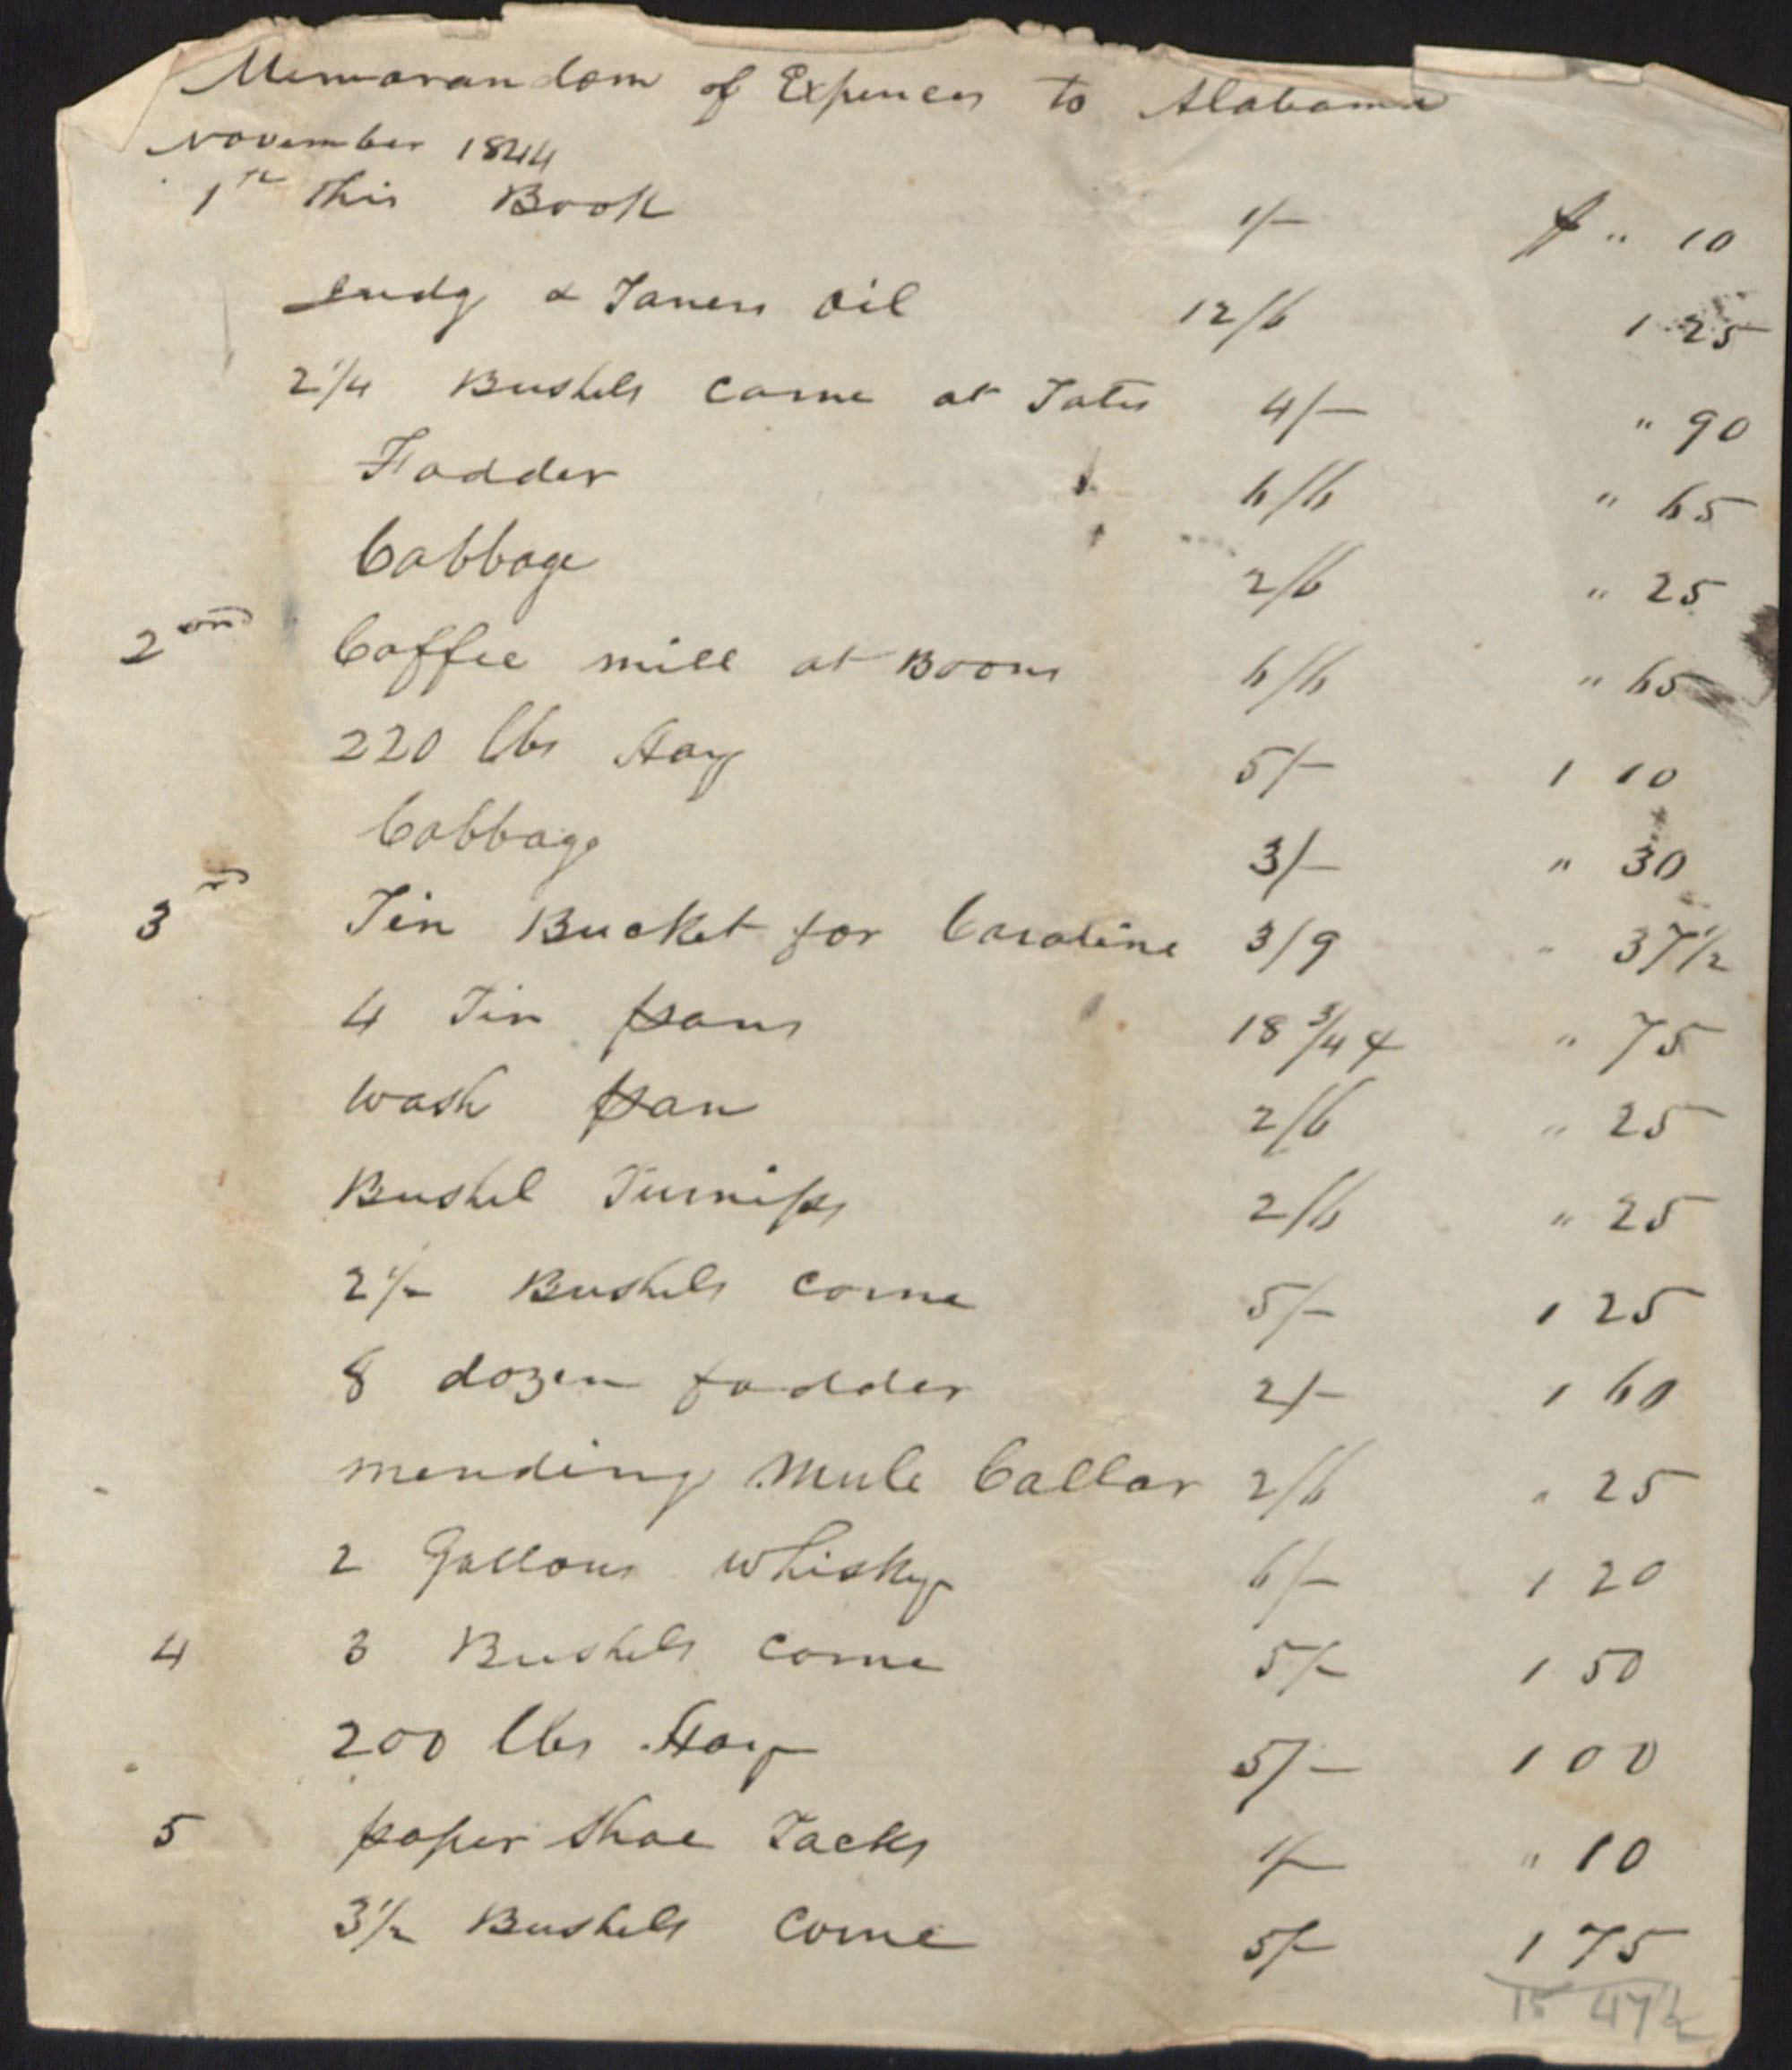 Page of Cameron's accounting book titled "Memorandum of Expenses to Alabama" recorded in November of 1844.